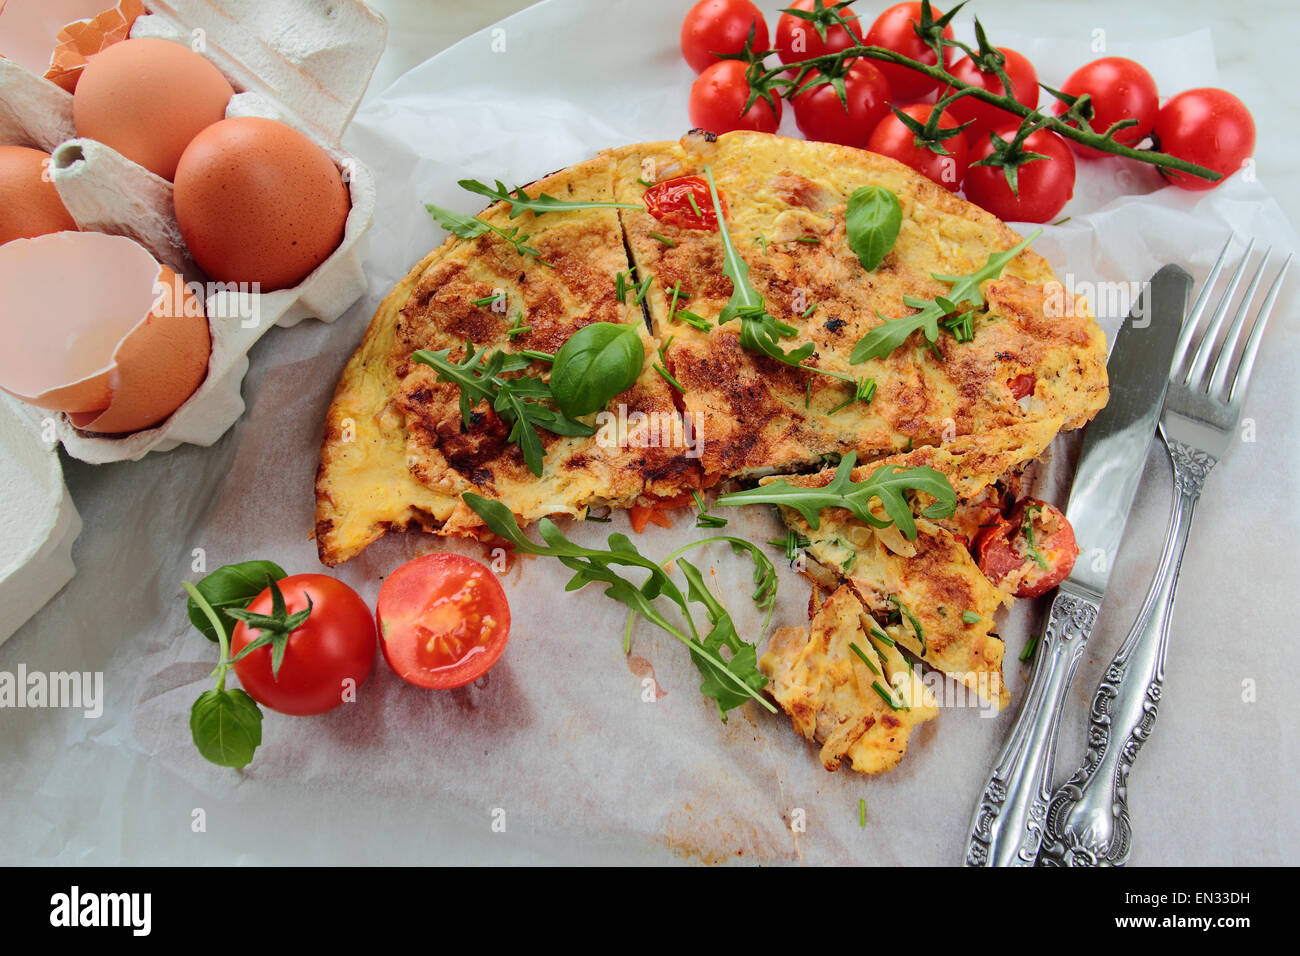 Delicious omelet with rucola and tomatoes for breakfast Stock Photo